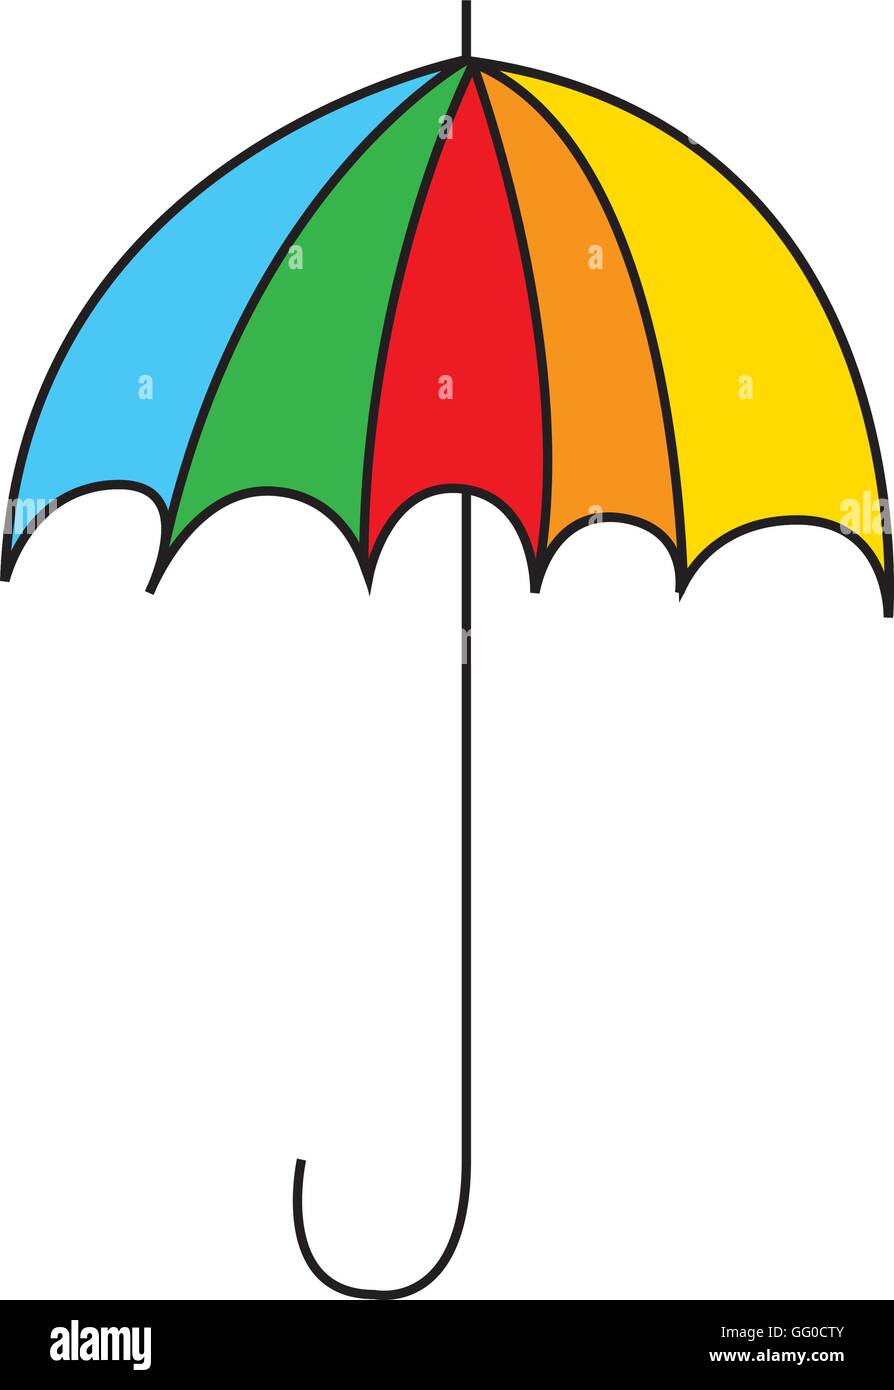 Umbrella Drawing  How To Draw An Umbrella Step By Step